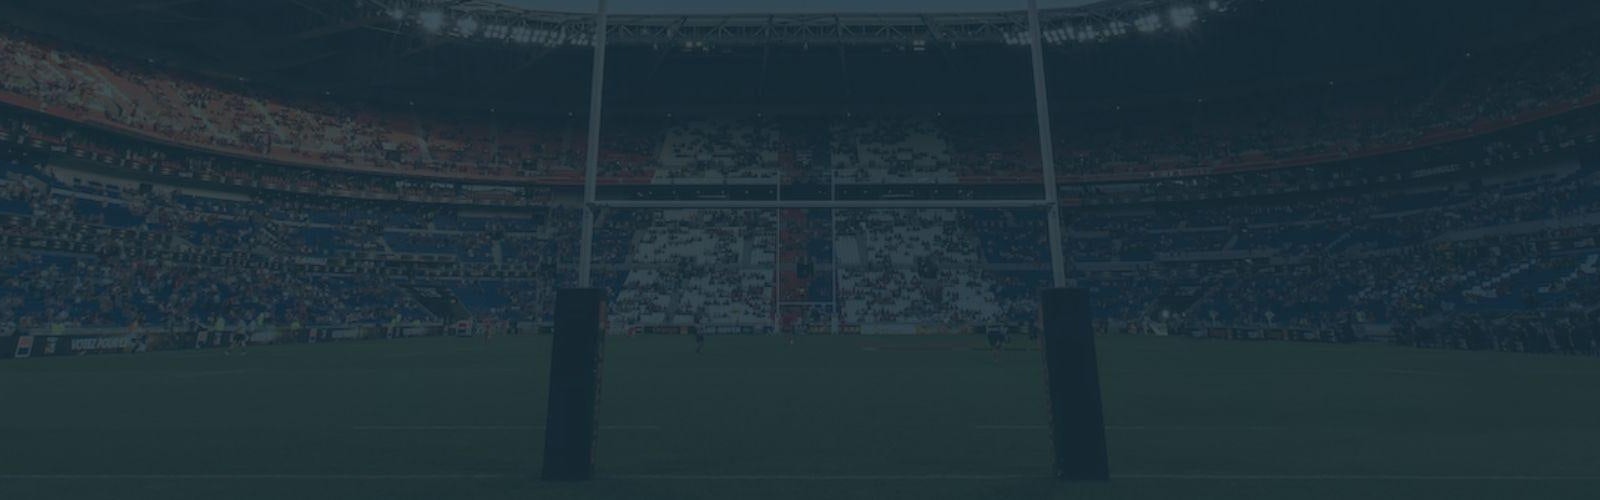 Rugby betting sites header image showing rugby posts